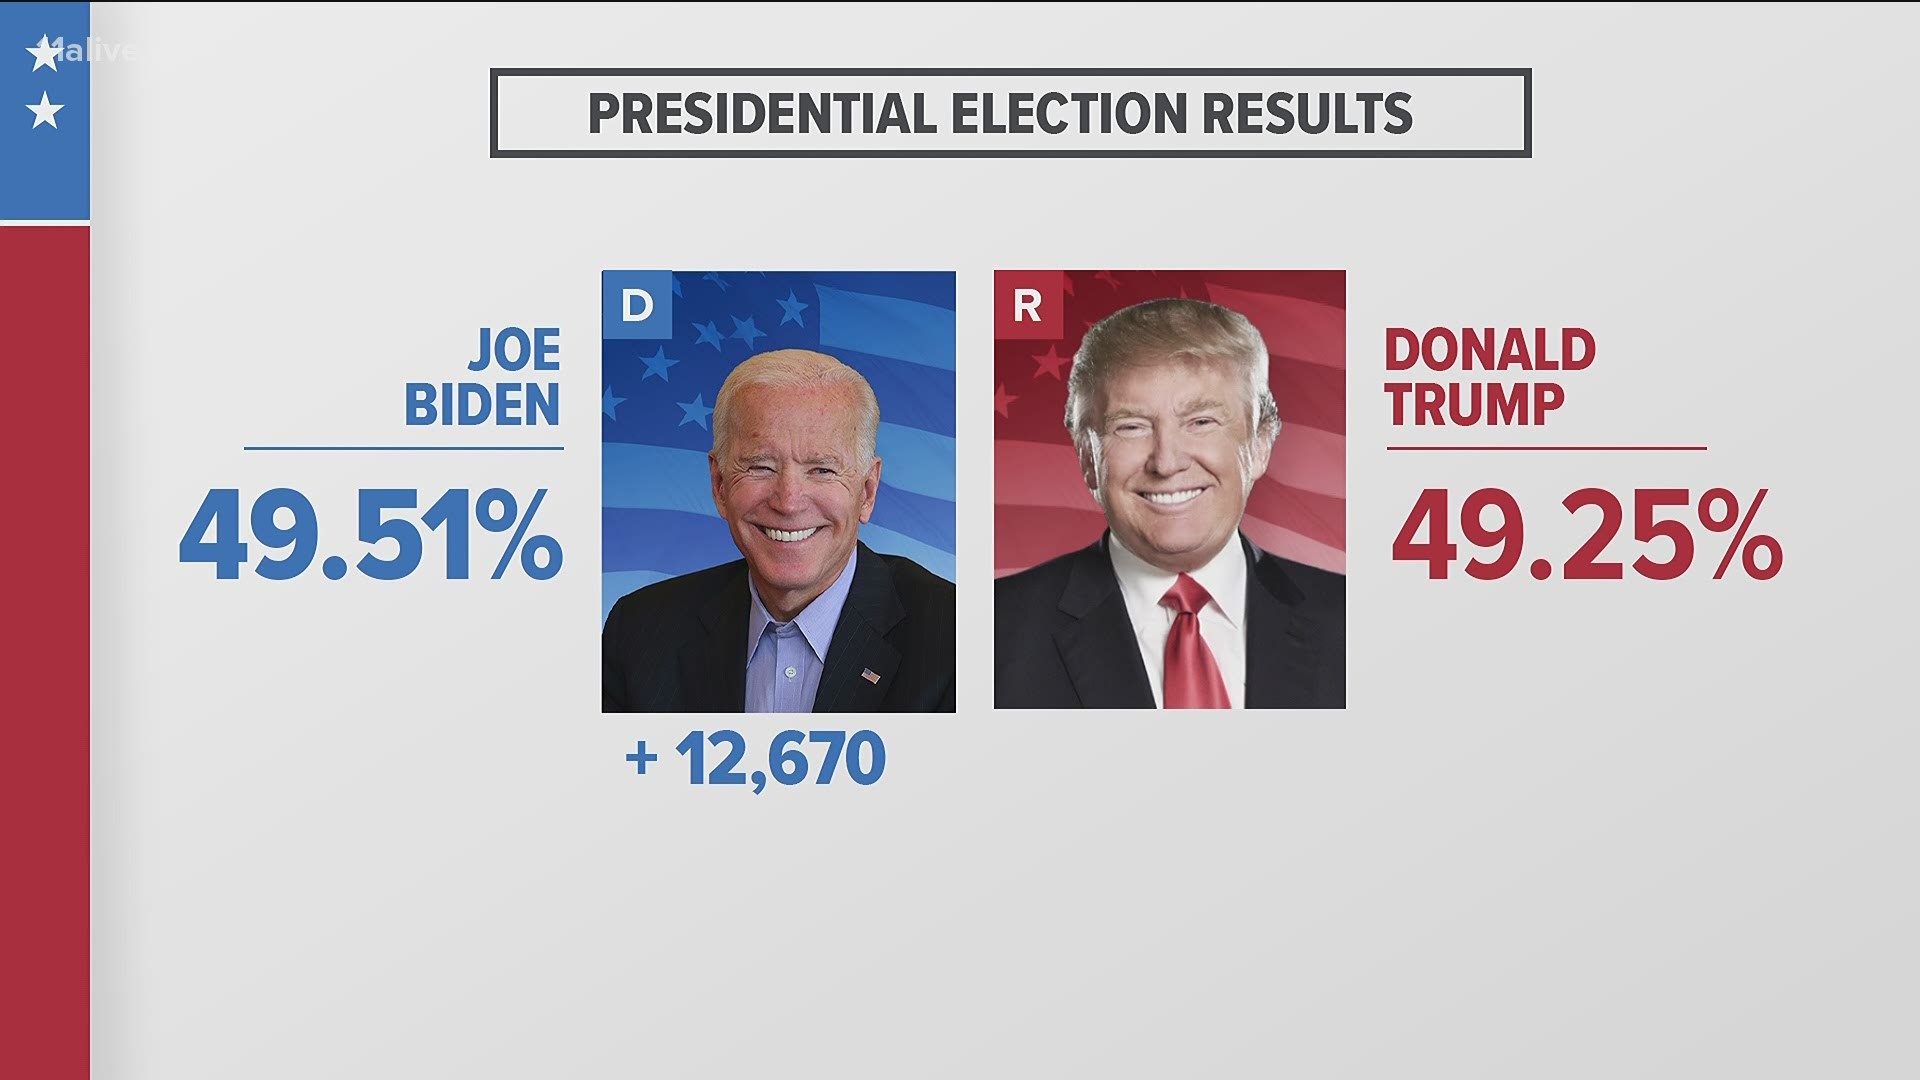 This is the third time the votes for the presidential race will be tallied.